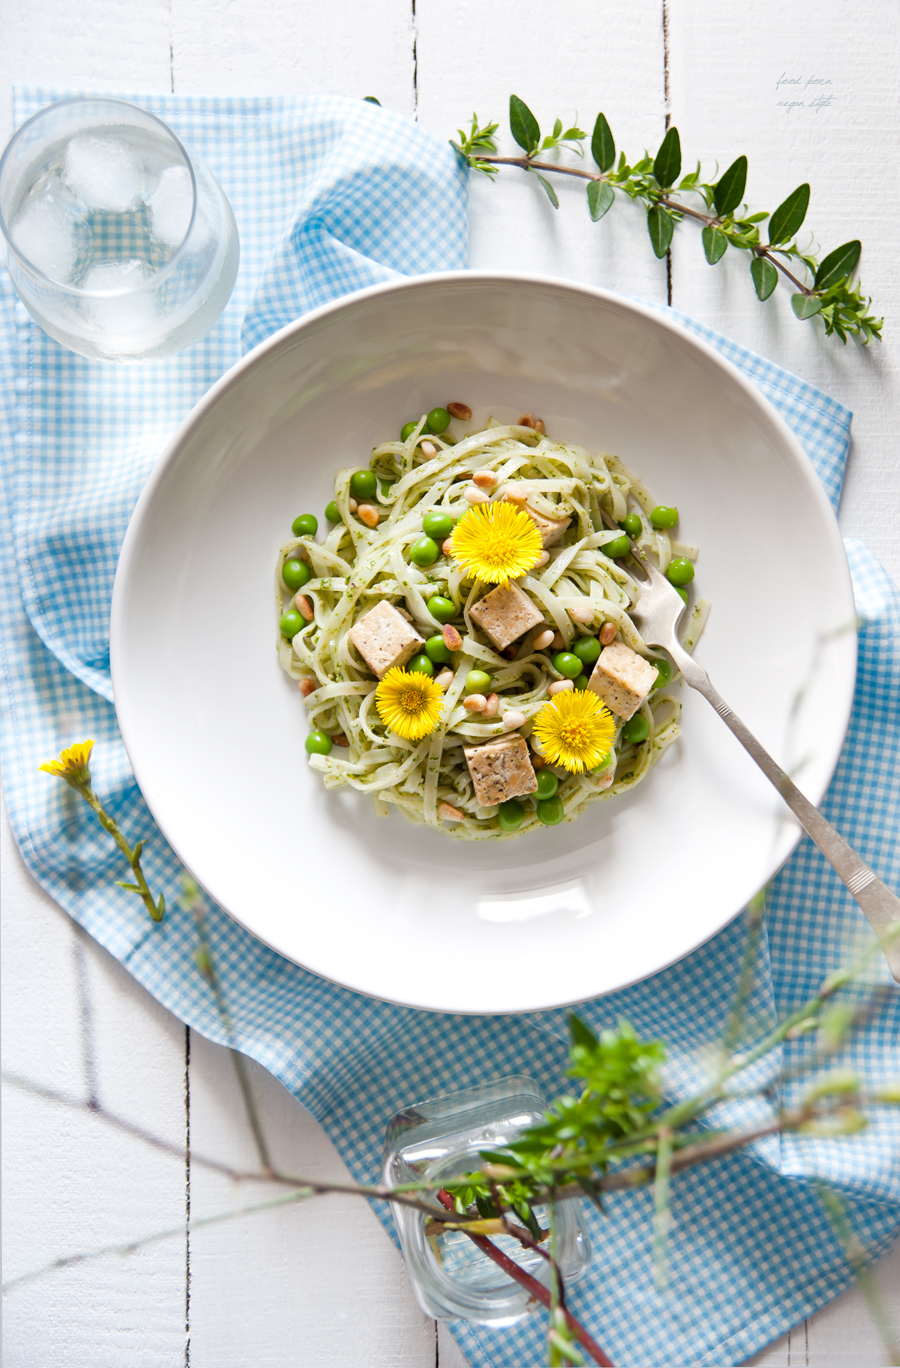 Spring noodles with pesto,tofu,peas and coltsfoot flowers